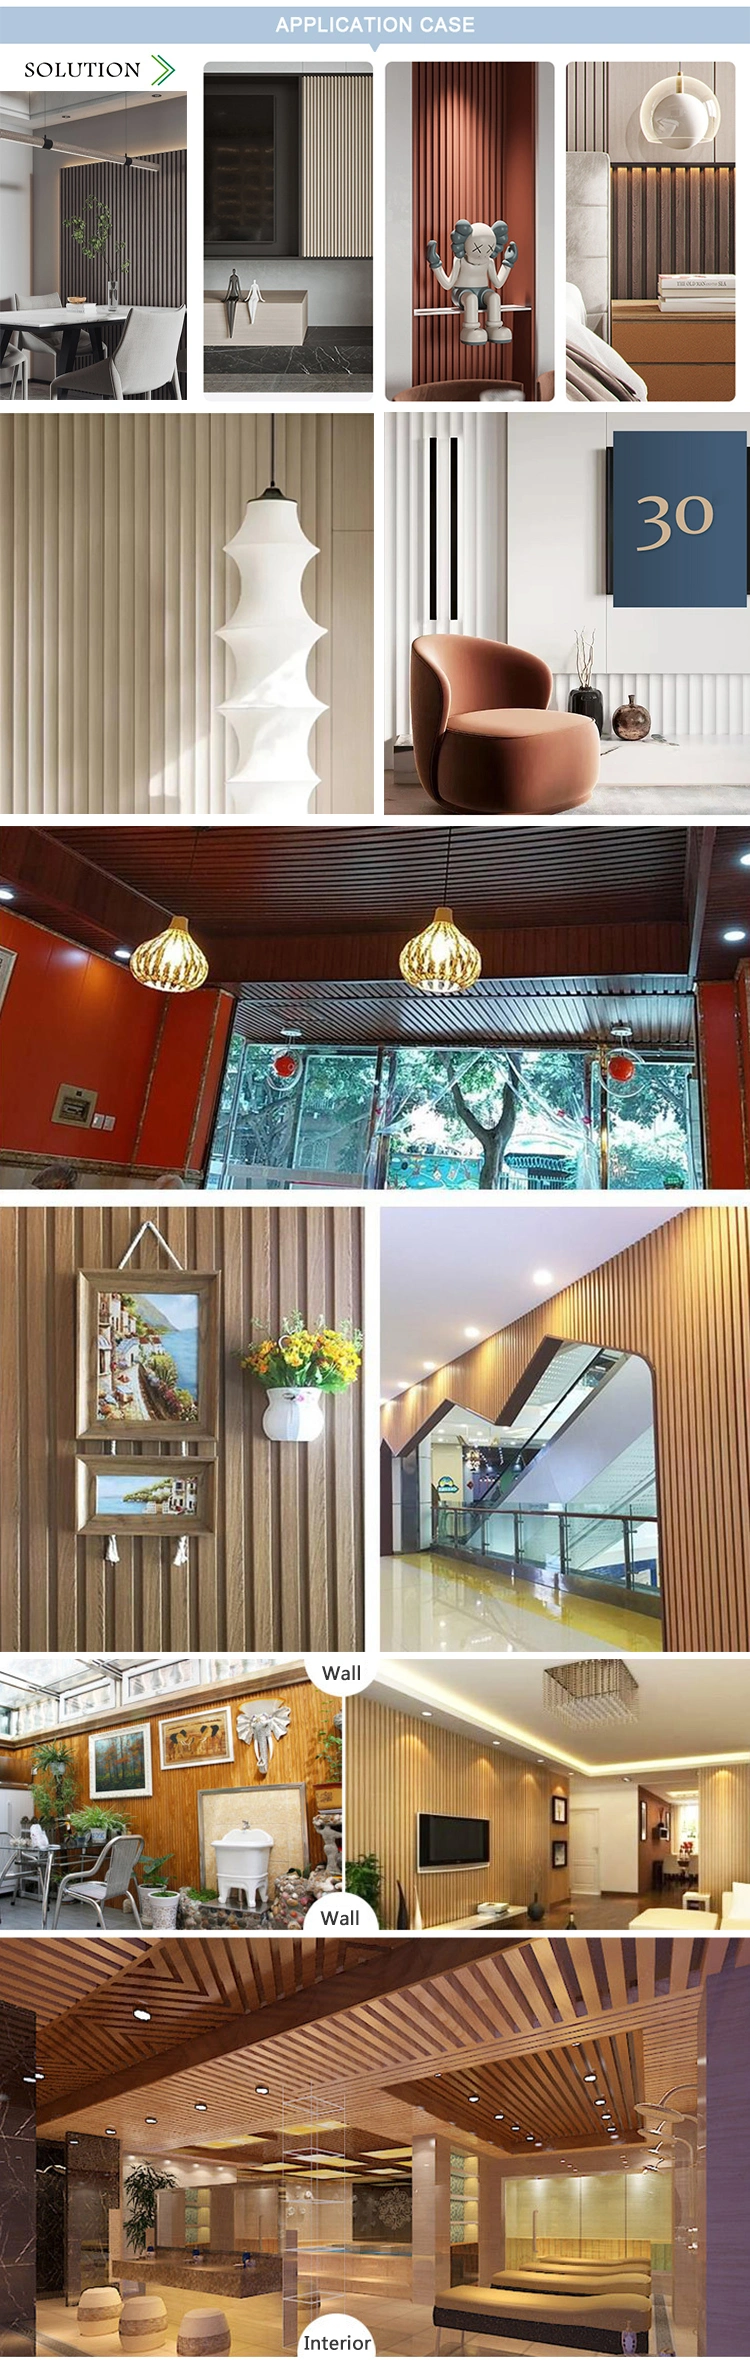 UV-Protect and Waterproof WPC Composite Wall Panel for Your House Interior Wood Wall Cladding Price